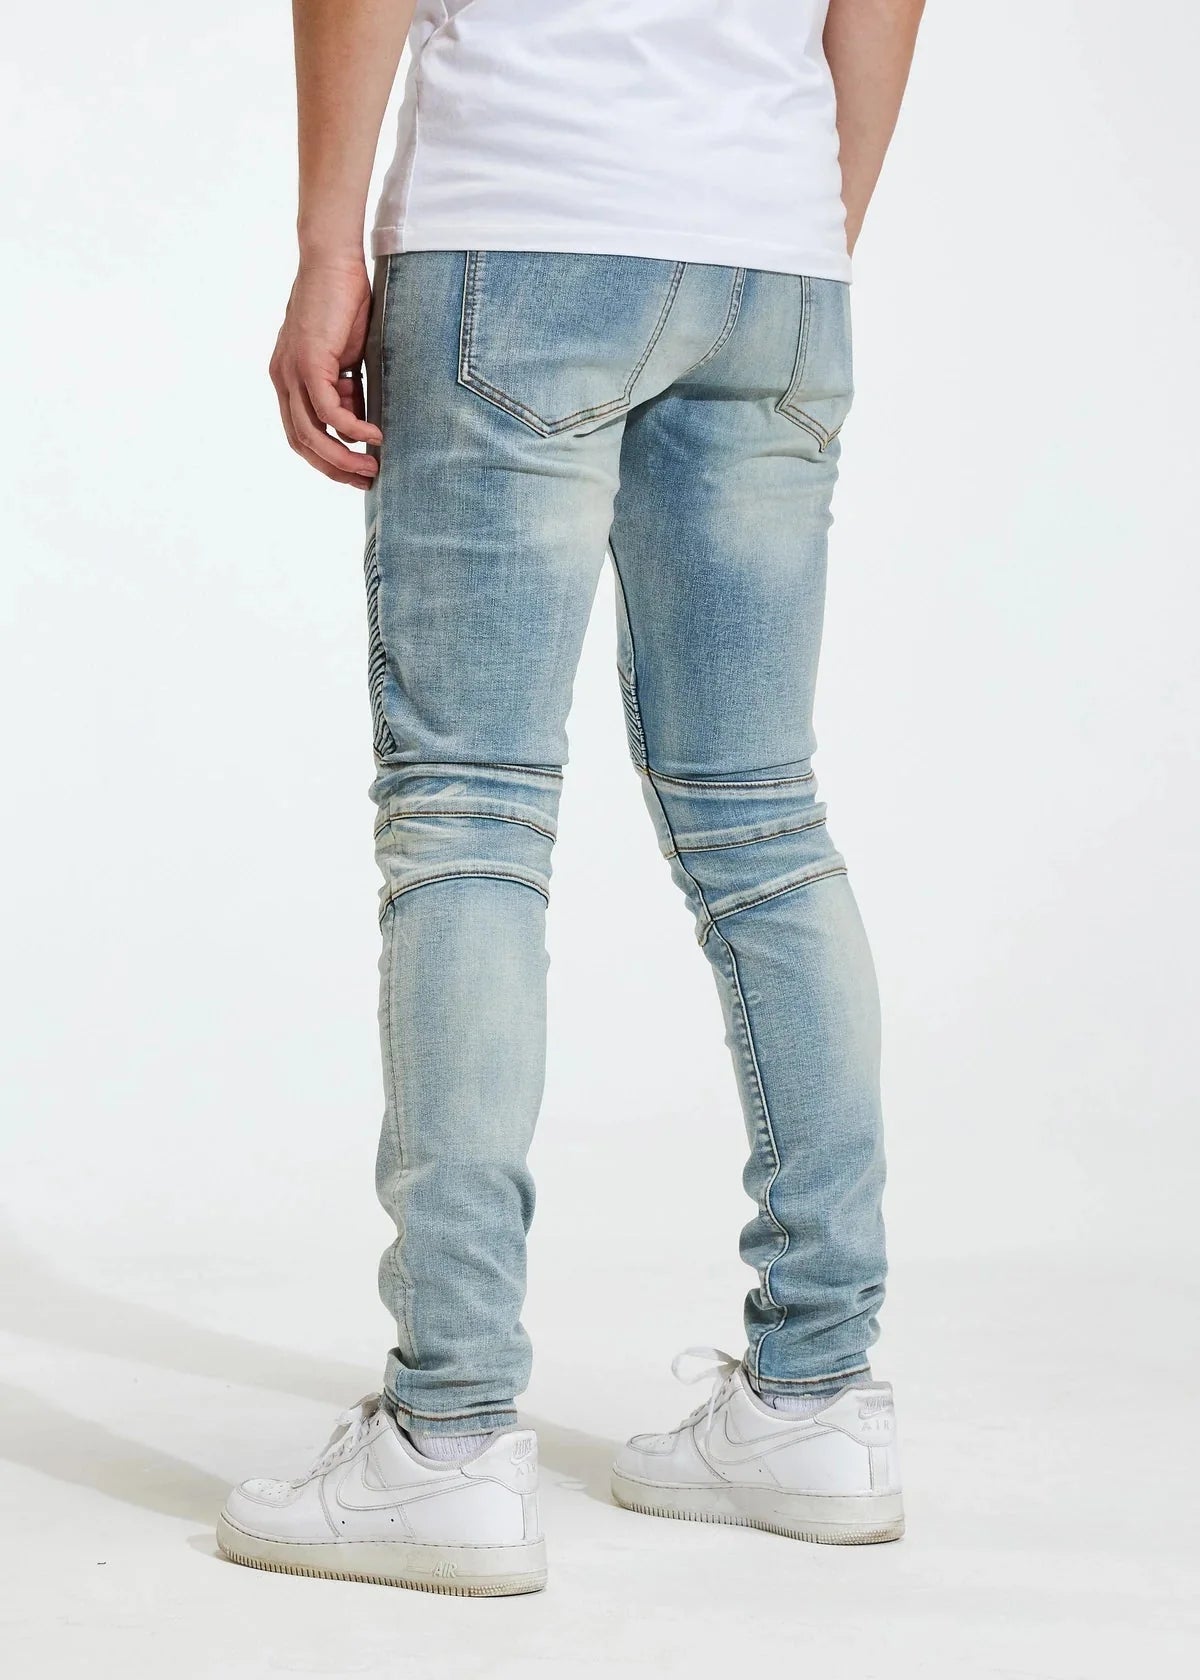 CRYSP DENIM MOTO JEANS WITH RIBBED KNEE BLUE WASH - CRYSPSP120-110